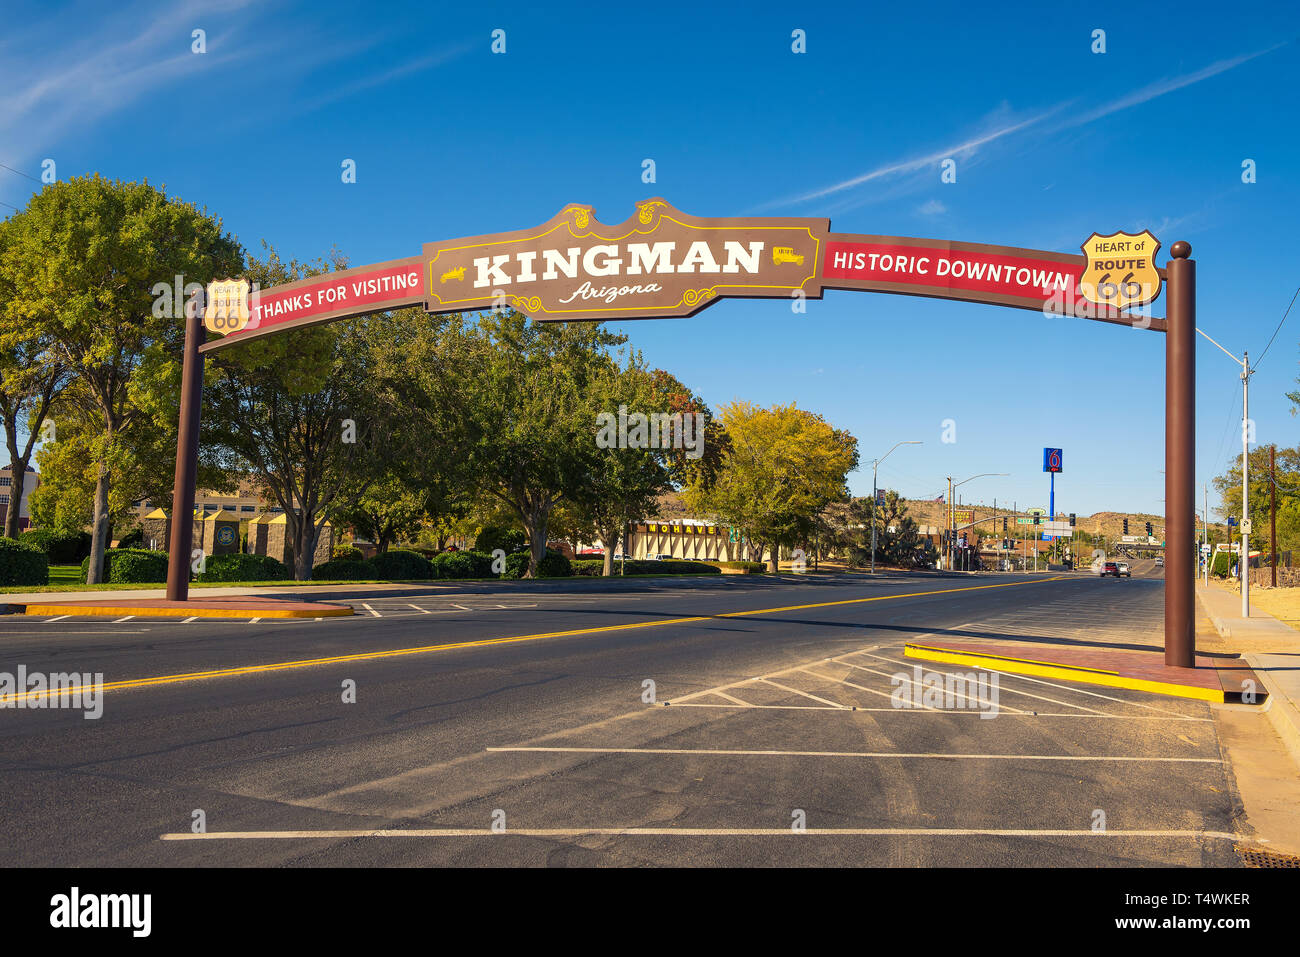 Thanks for visiting Kingman downtown street sign located on historic route 66 Stock Photo